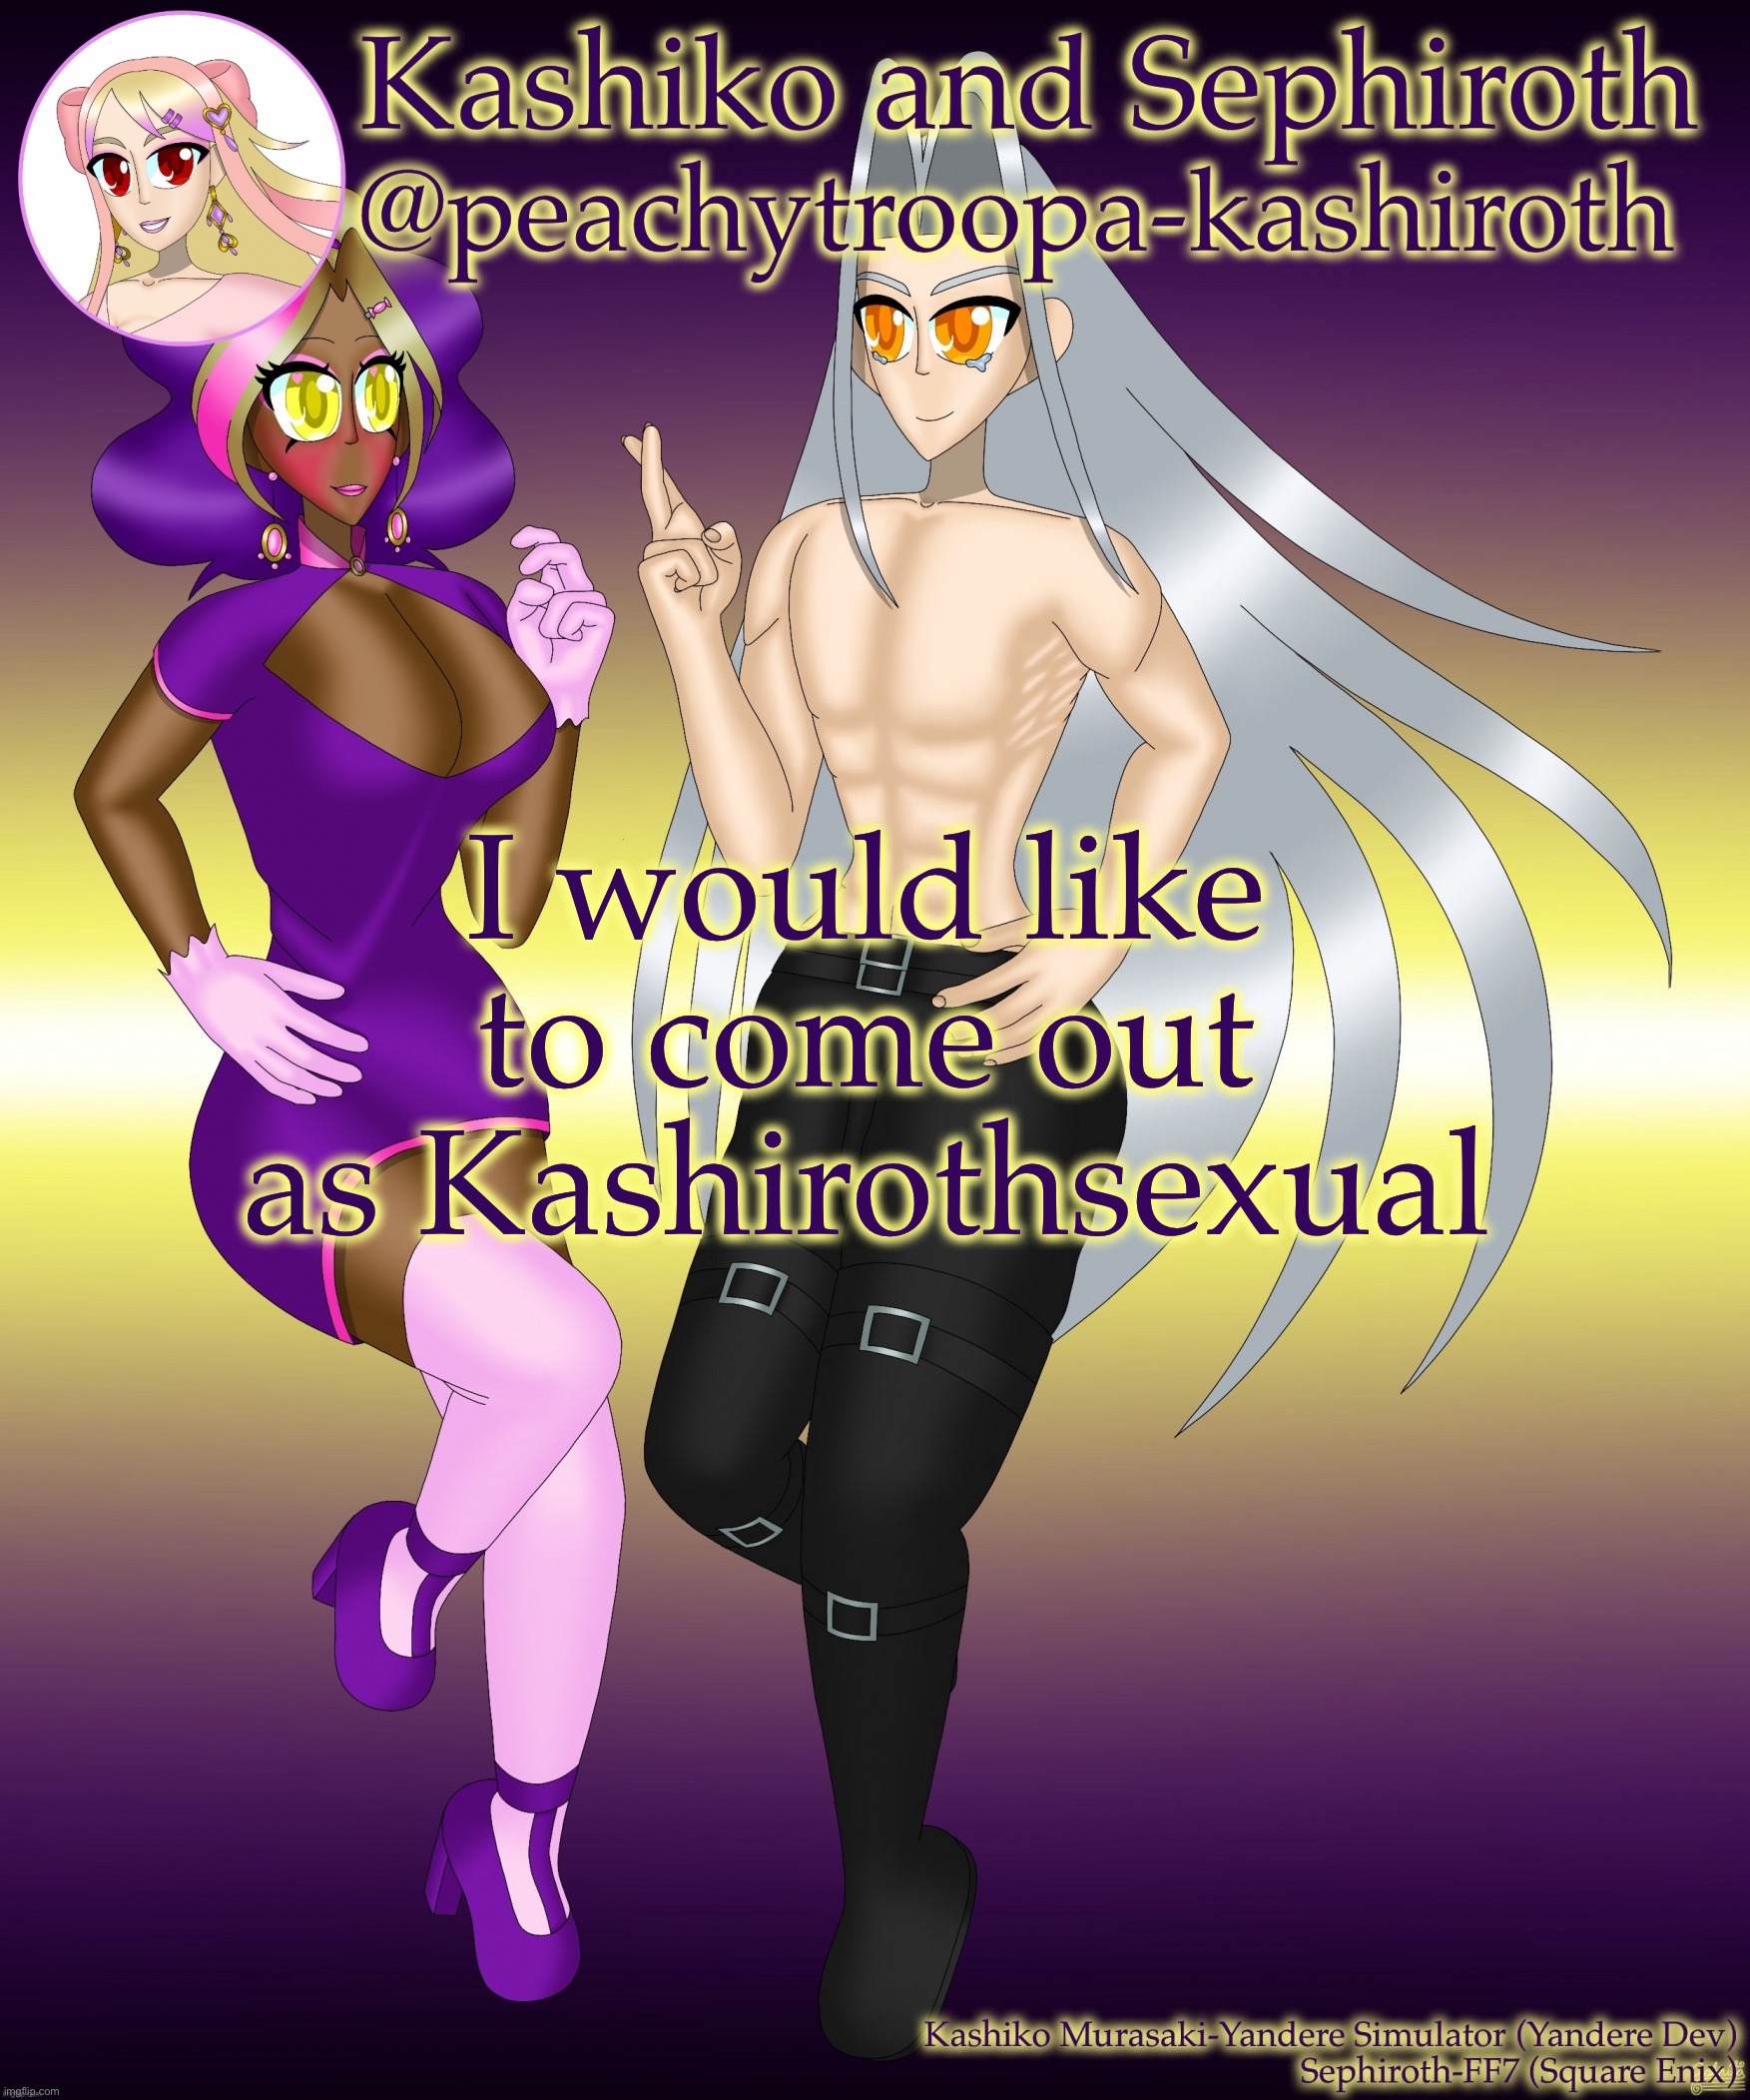 Late to the trend but ok | I would like to come out as Kashirothsexual | image tagged in kashiko murasaki and sephiroth | made w/ Imgflip meme maker